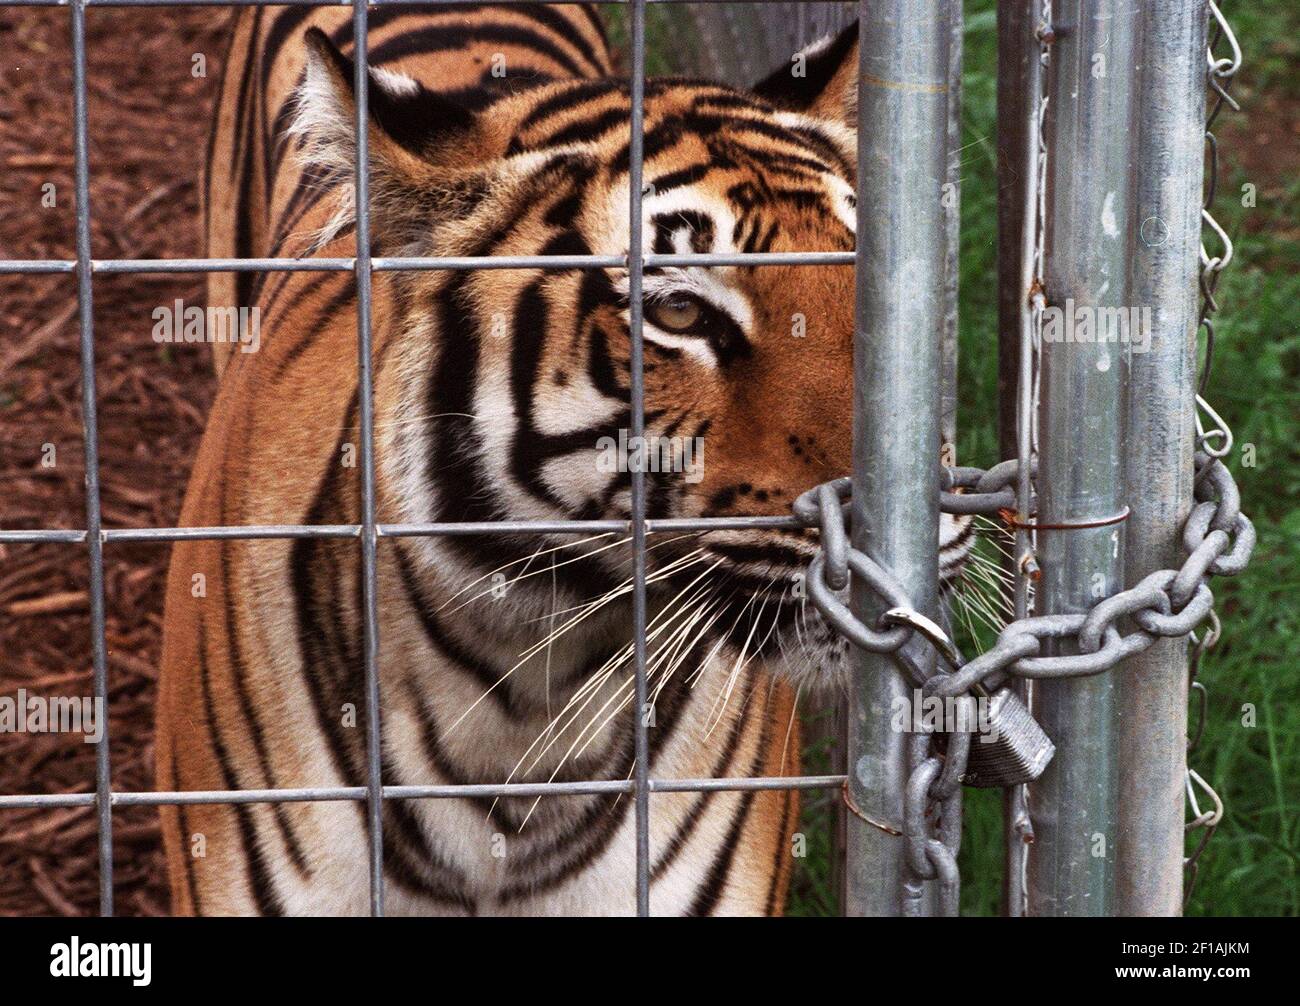 KRT US NEWS STORY SLUGGED: ZOO SAFETY KRT PHOTOGRAPH BY JUDITH CALSON/SAN  JOSE MERCURY NEWS (KRT135- February 11) A tiger at the Wildlife Animal  Orphanage outside of San Antonio, Texas, a non-profit